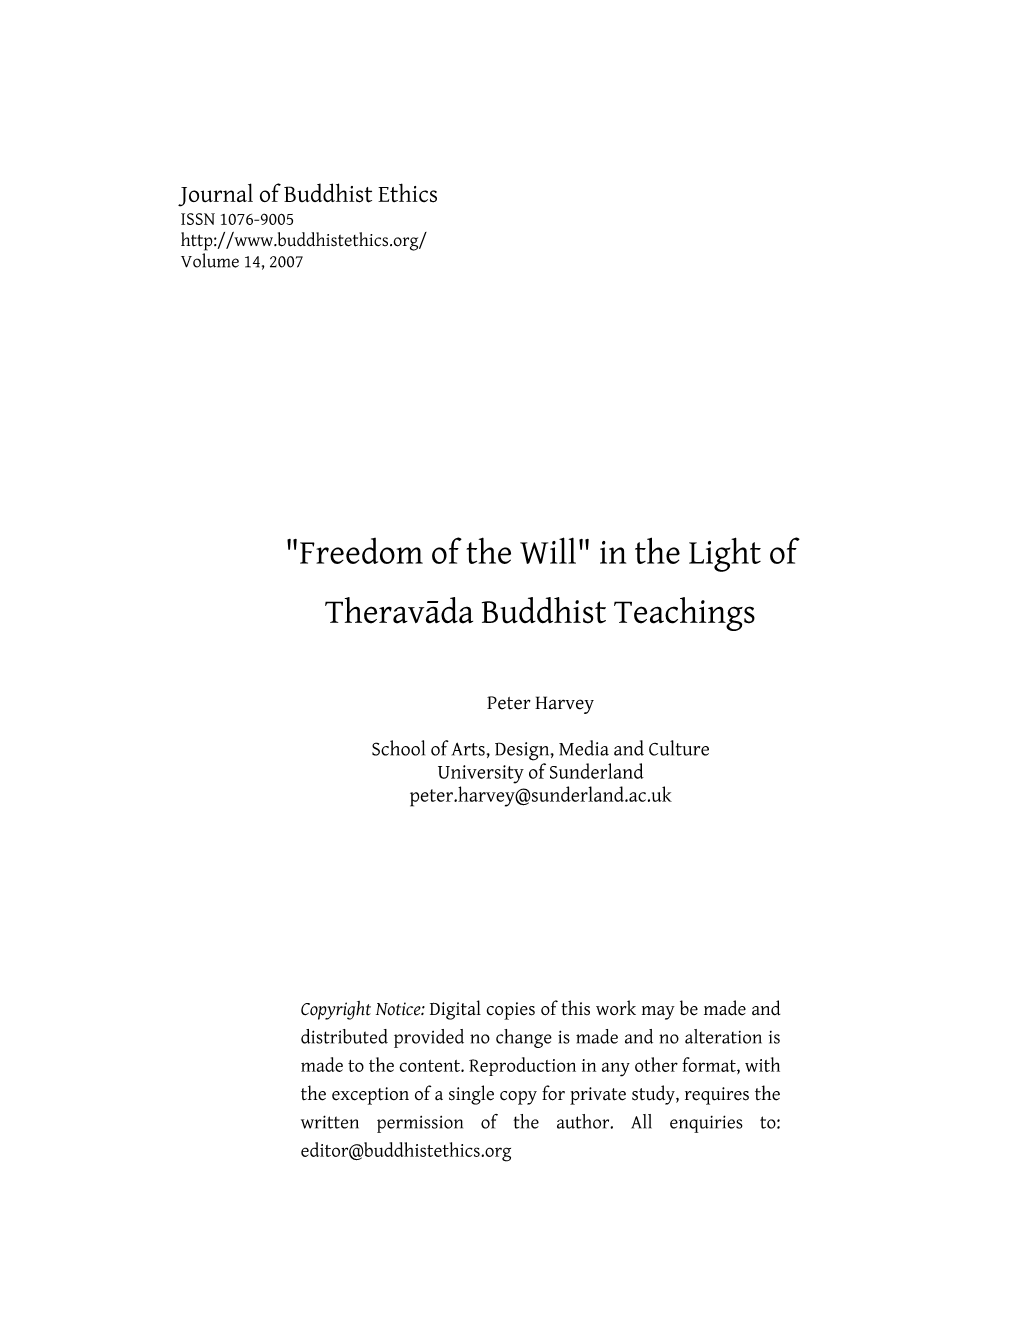 “Freedom of the Will” in the Light of Theravāda